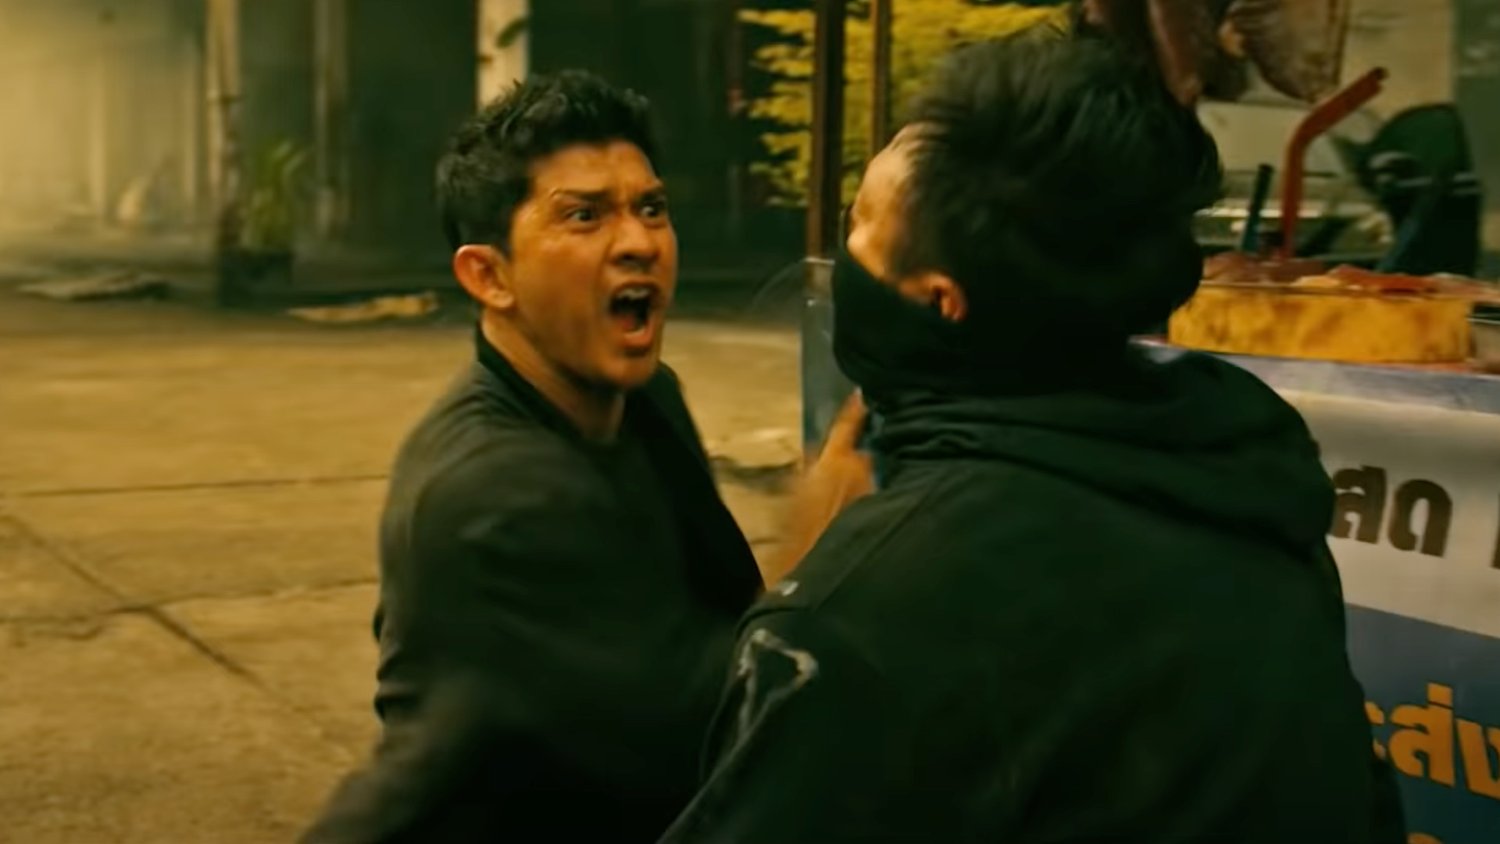 Kick Ass For Iko Uwais And Lewis Tan's Mystical Martial Arts Film FISTFUL OF VENGEANCE